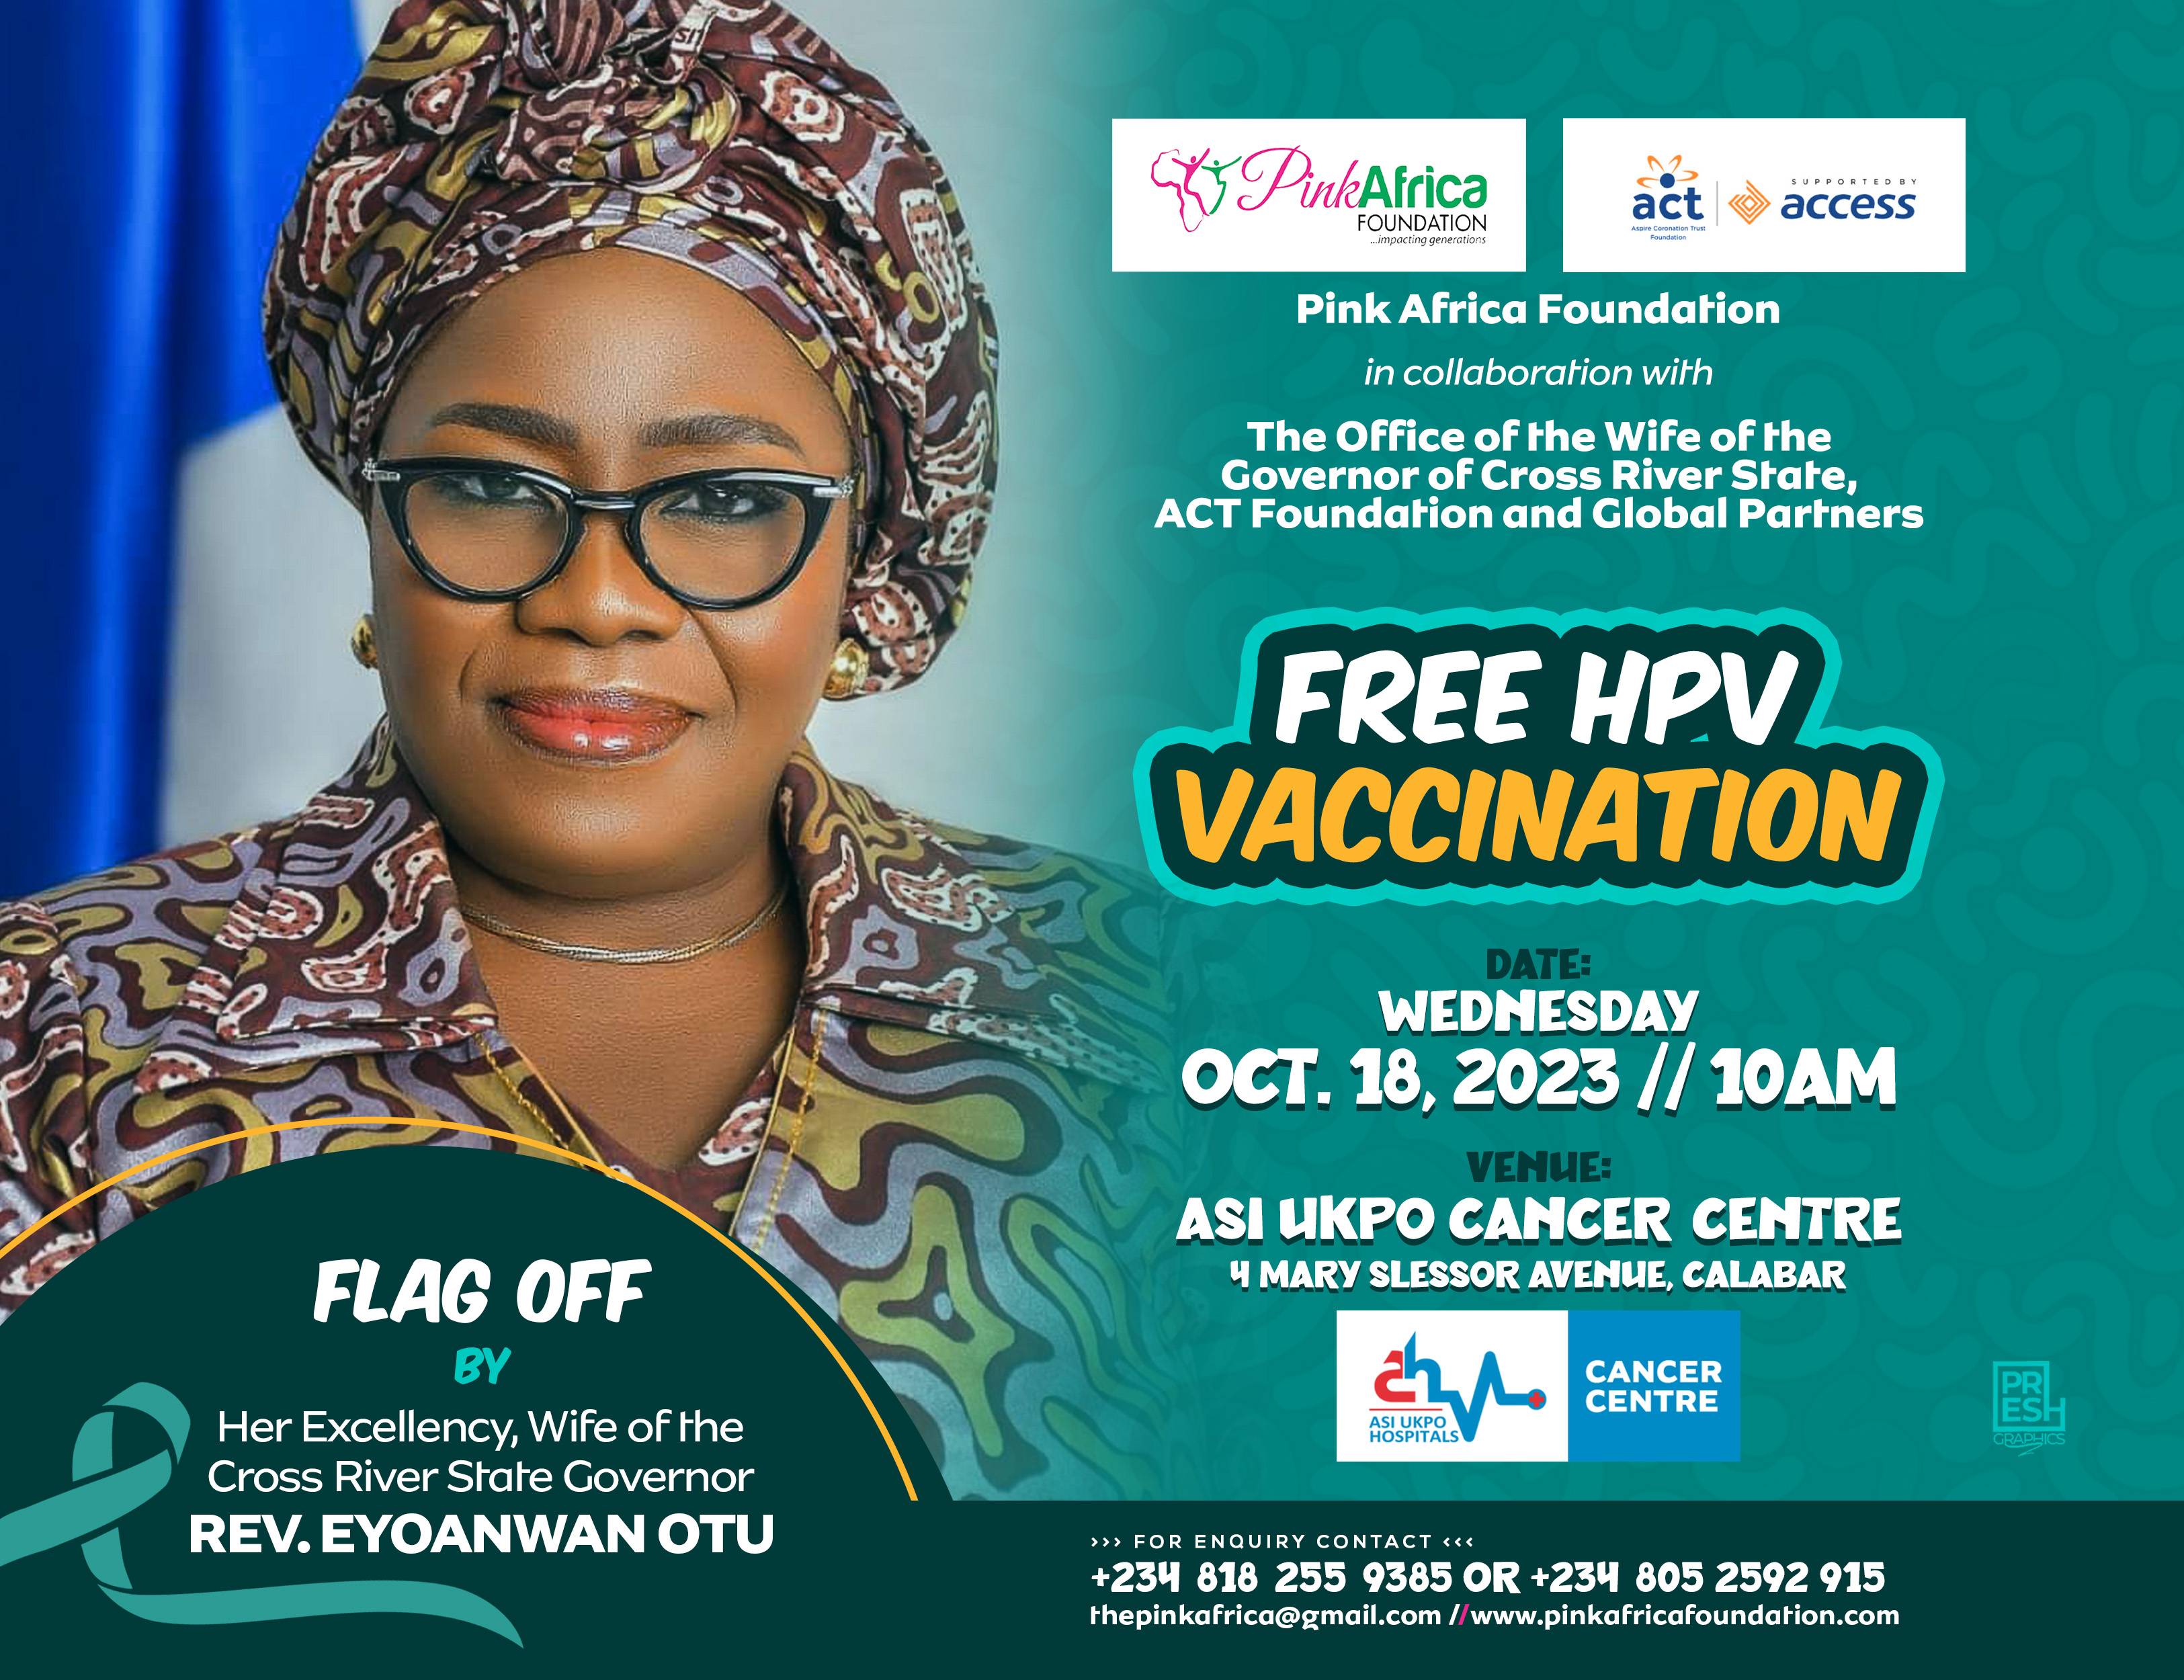 Her Excellency Rev. Eyoanwan Otu, Wife of the Cross River Governor flags off HPV Vaccination by Pink Africa Foundation and ACT Foundation, with support from ASI Ukpo Cancer Centre, Calabar